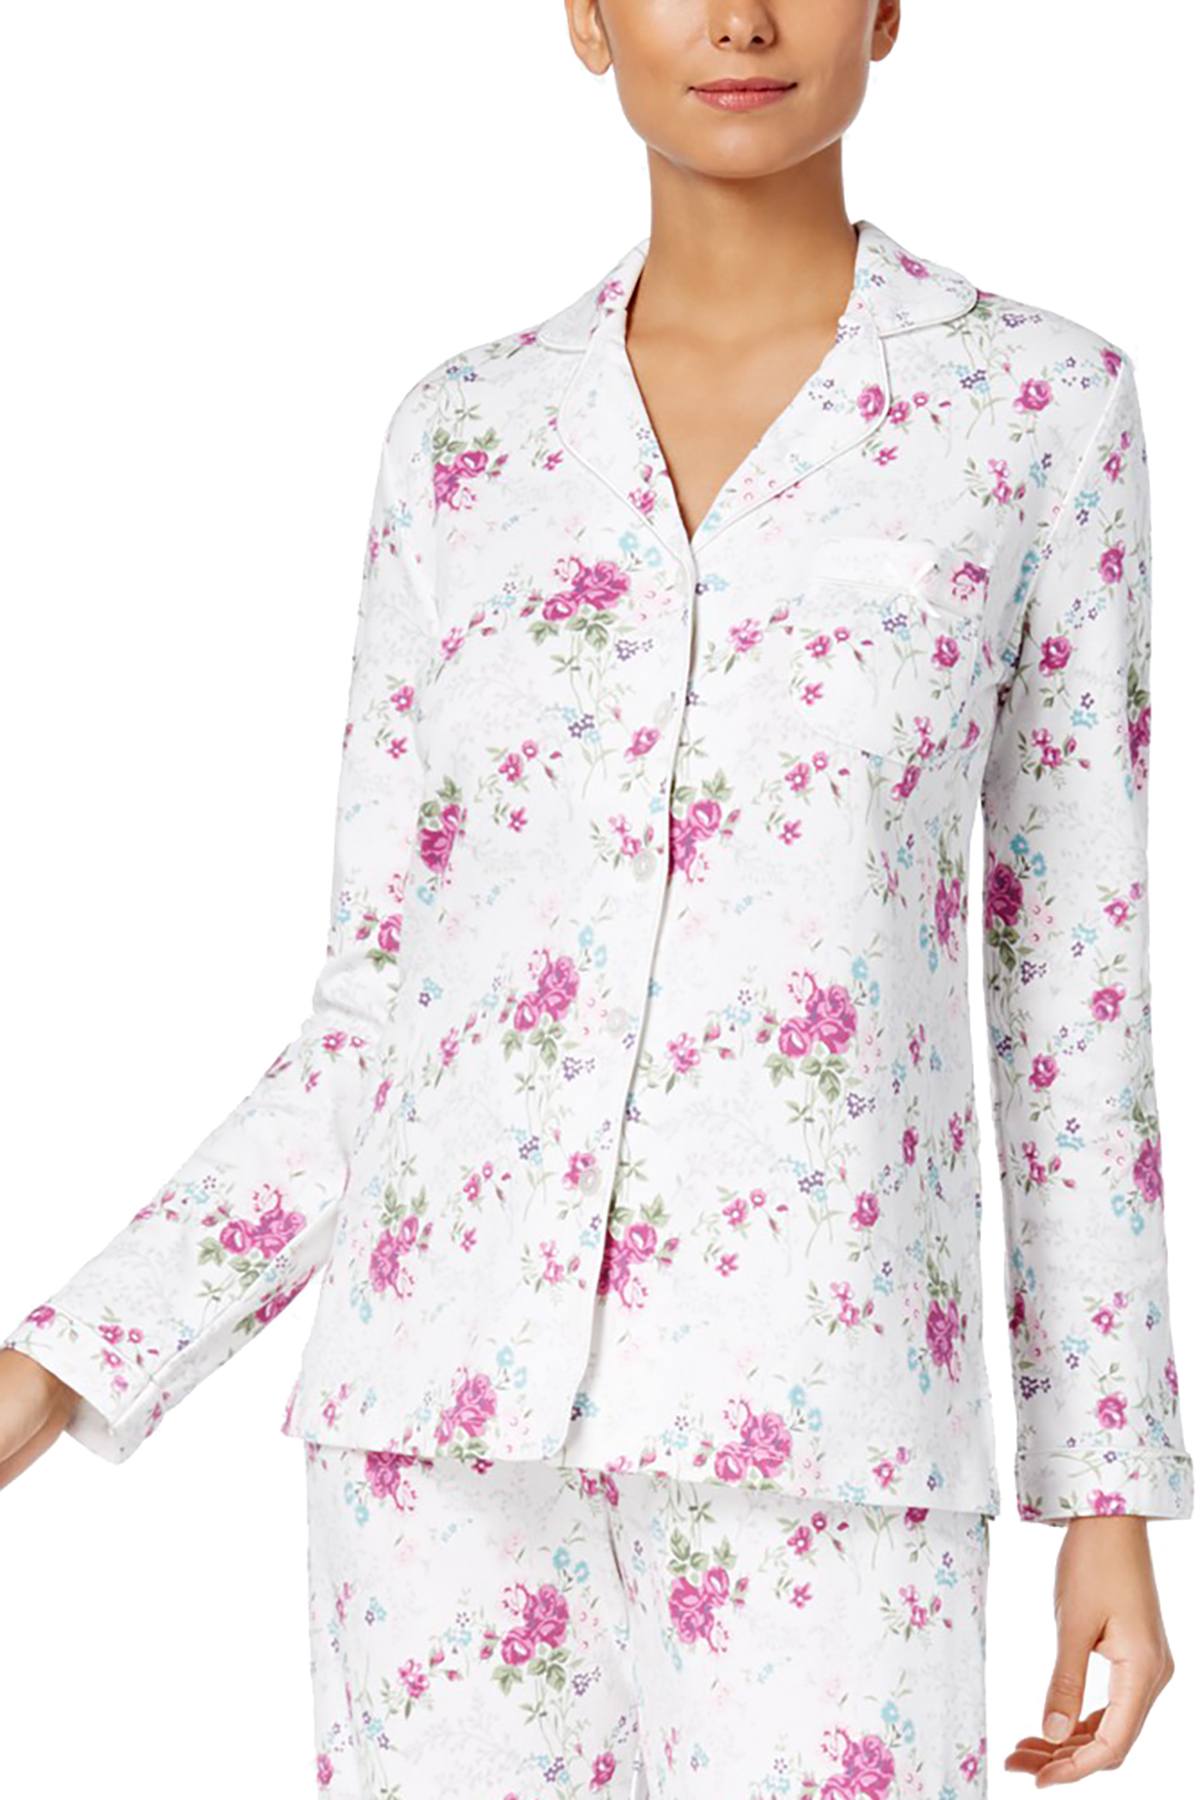 Charter Club Intimates Vintage-Floral Printed Button-Front Cotton PJ Top